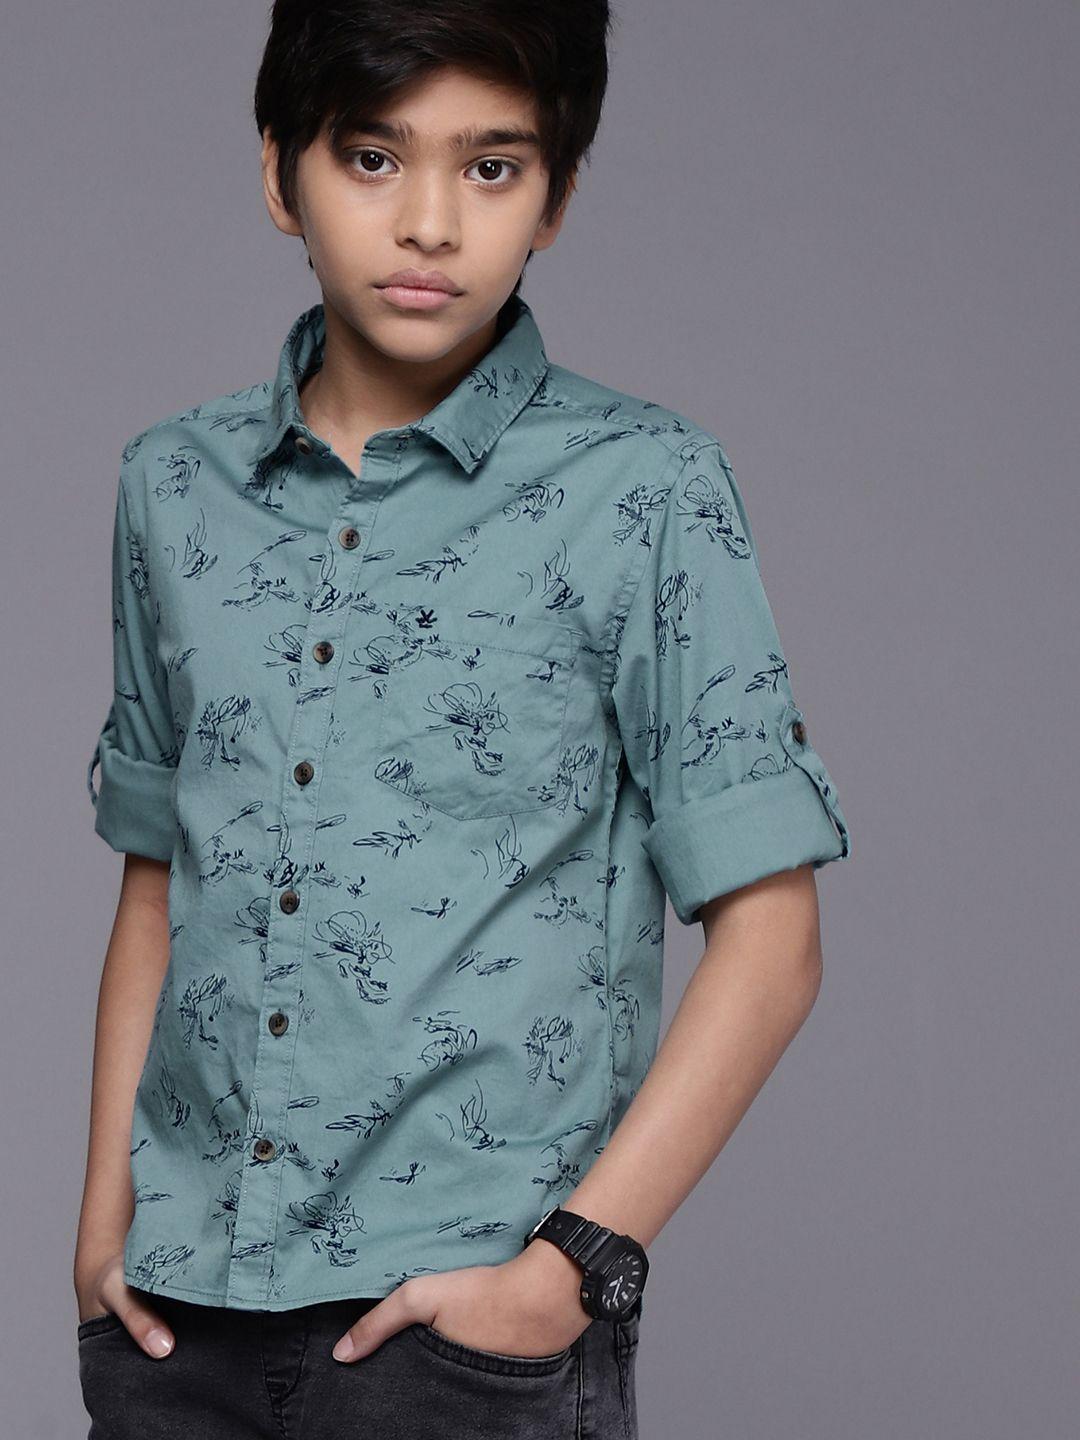 wrogn youth boys teal blue slim fit printed pure cotton casual shirt